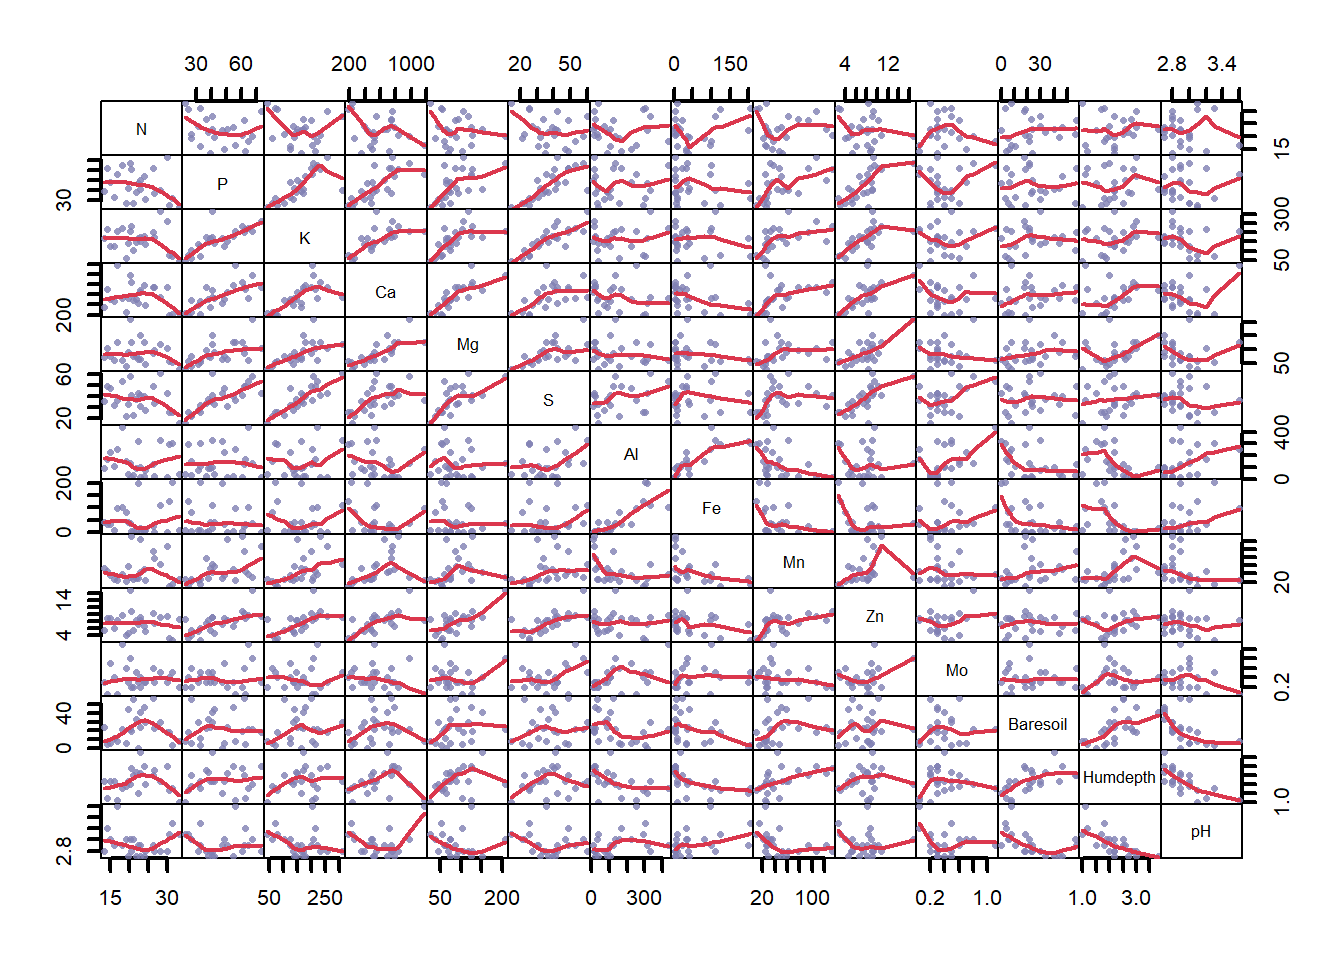 Large plot matrix with pairwise correlations where individual points and overall trend lines are given.